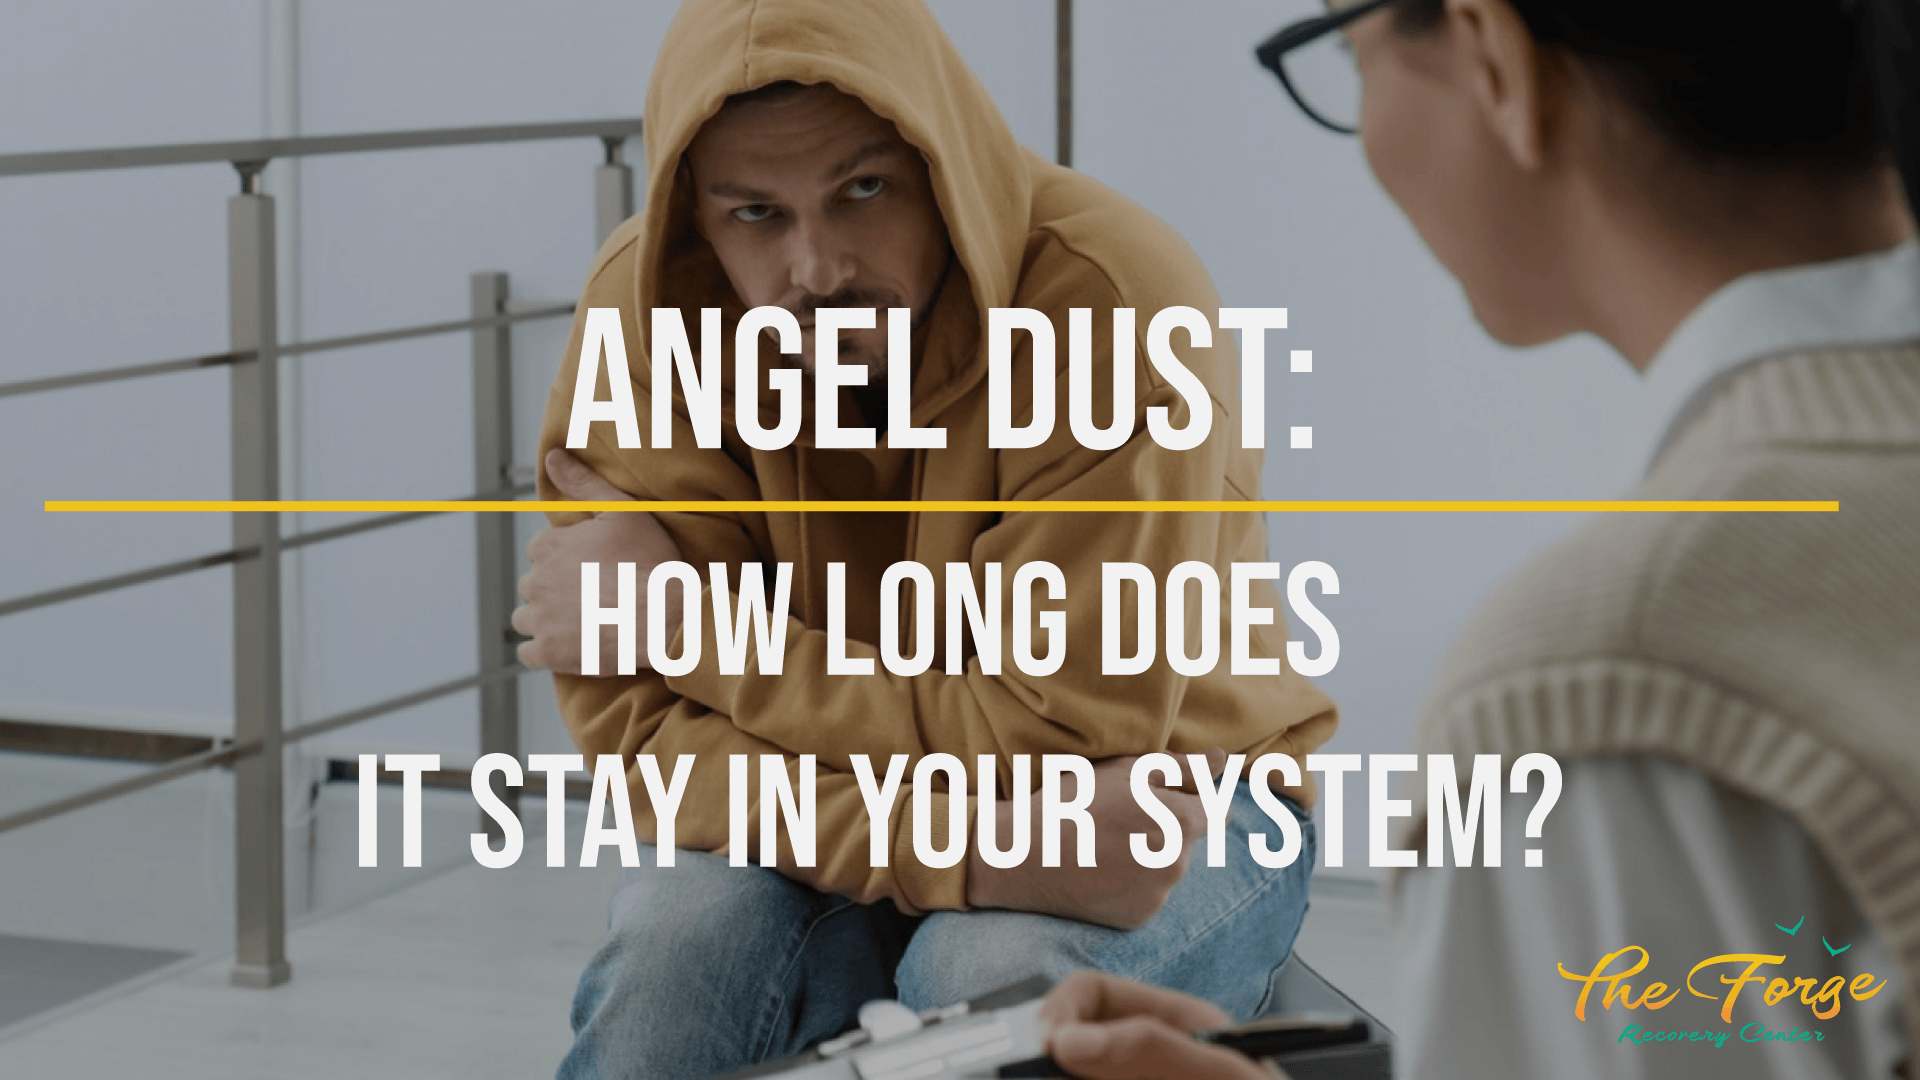 How Long Does Angel Dust Stay in Your System?